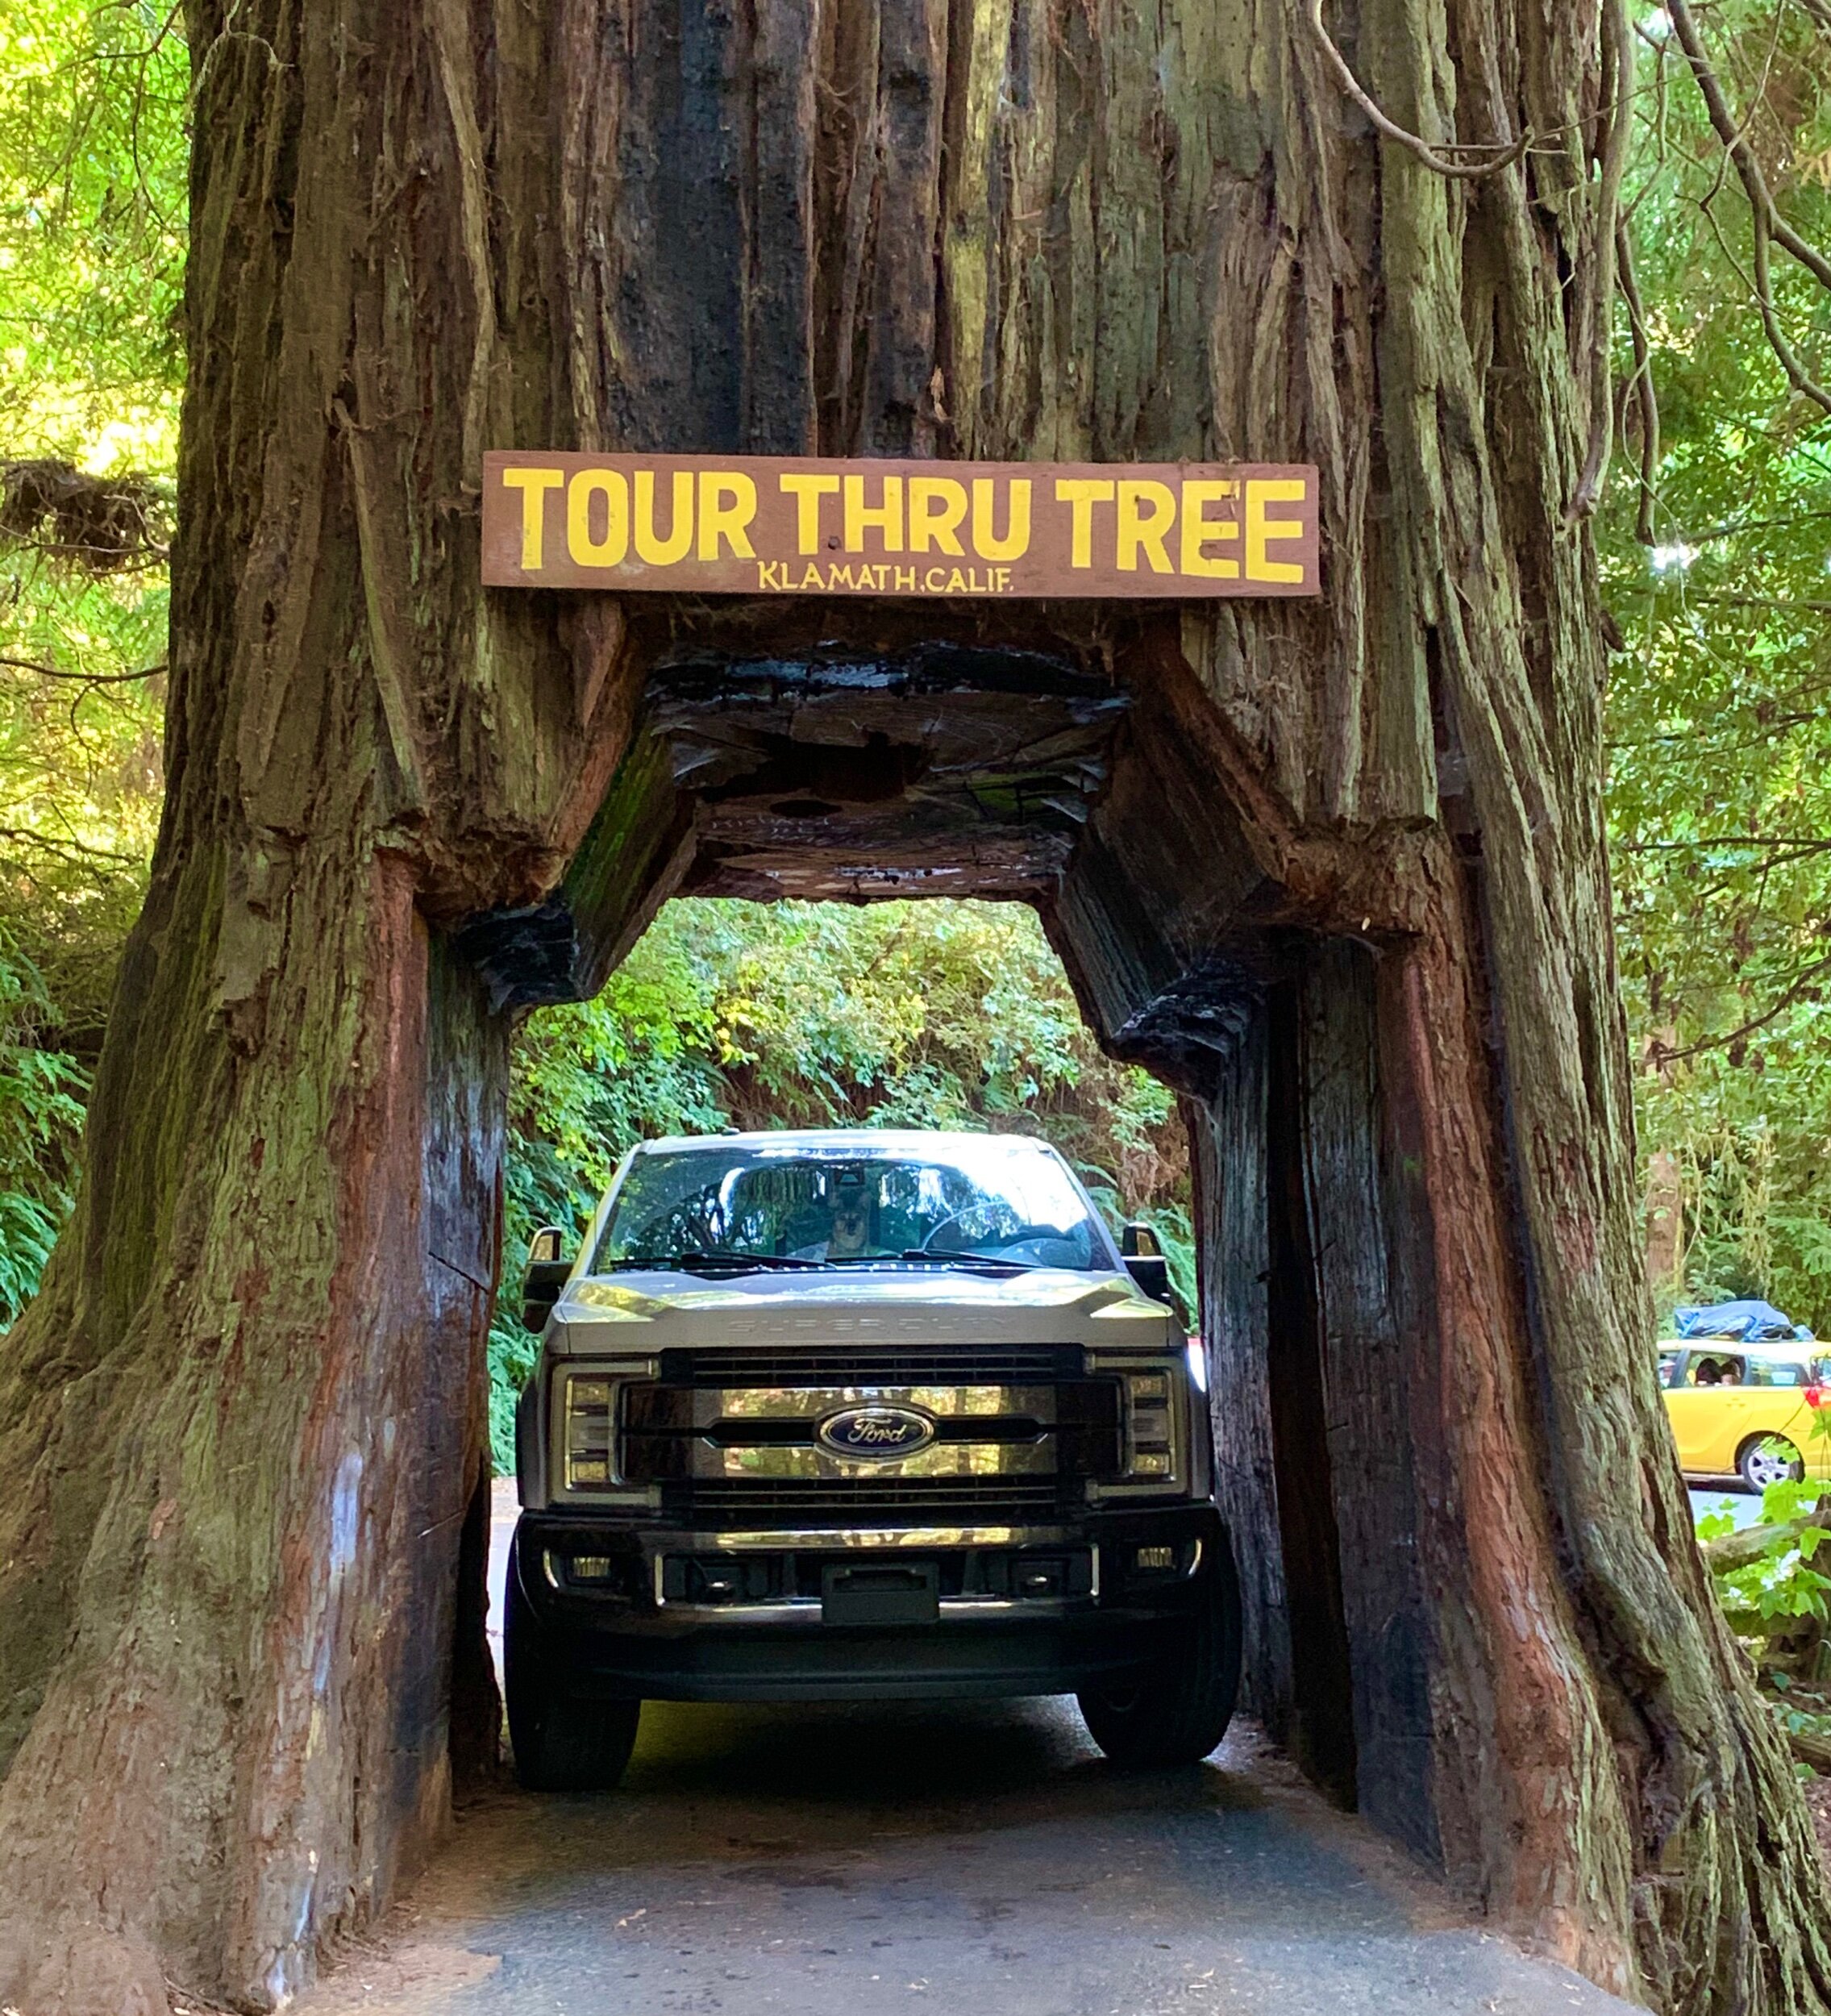  Massive redwoods are part of the culture of the northwest part of the state. This is one of a few drive-through trees in the area. We barely fit!  